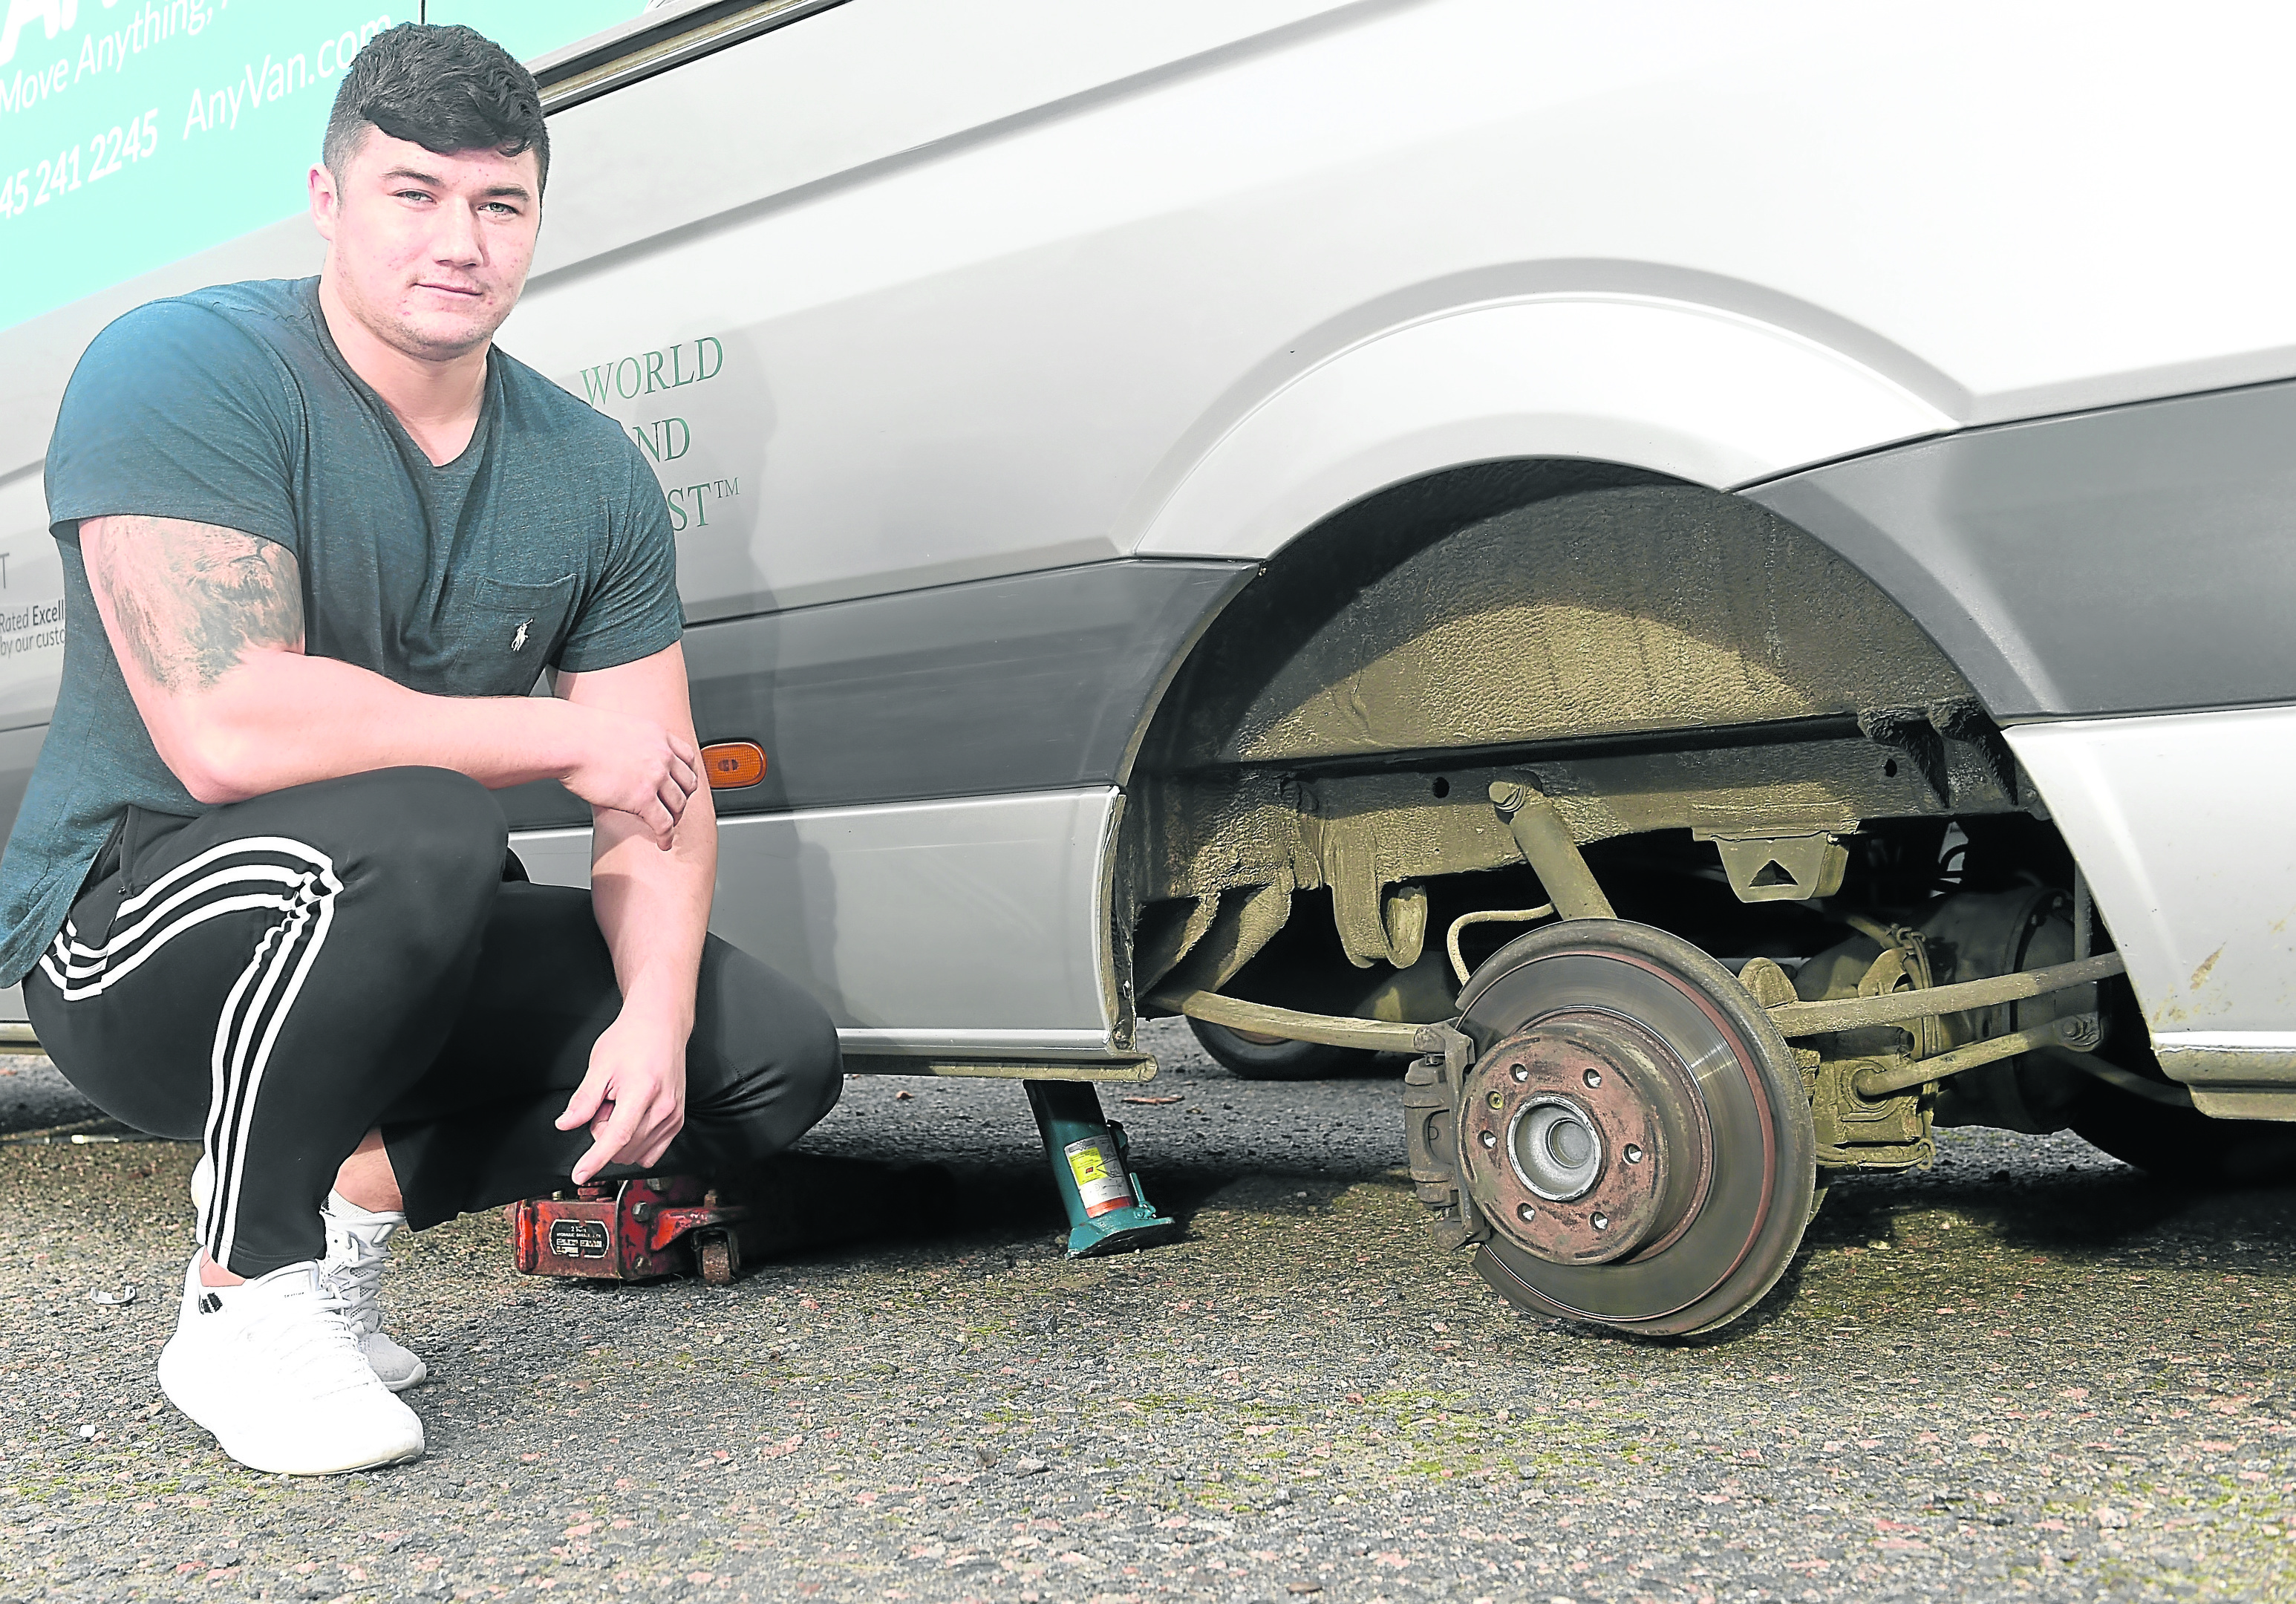 Neighbour Jordan Coia who helped remove the injured man from beneath the van. Picture by Sandy McCook.